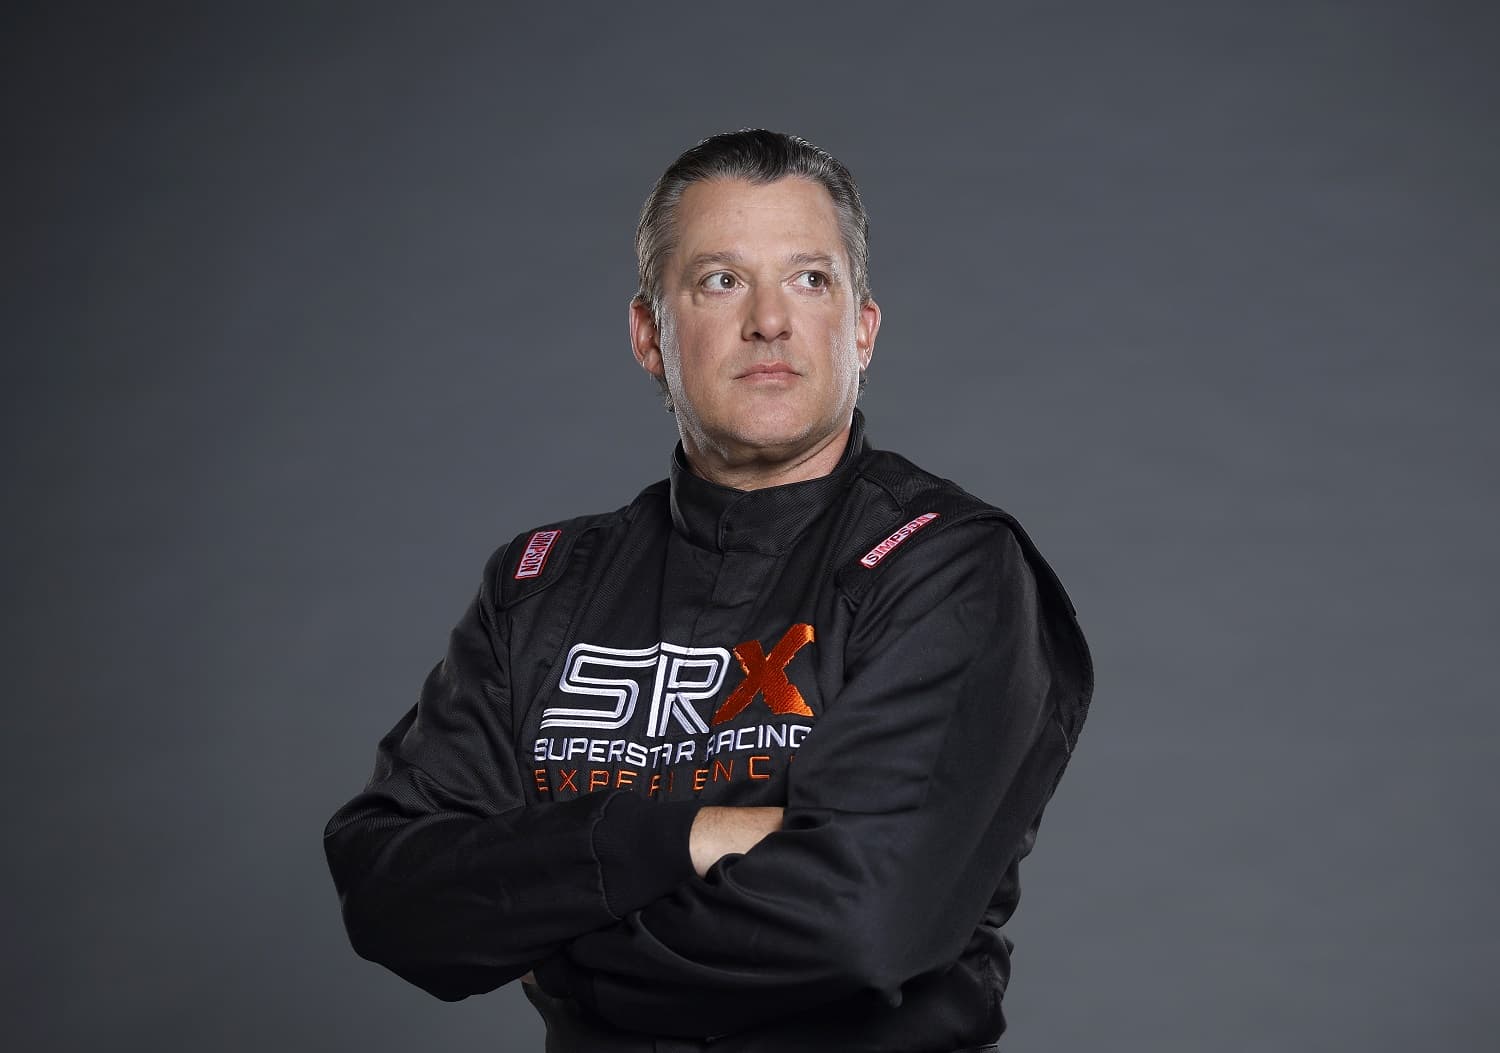 Tony Stewart poses for a photo during the Superstar Racing Experience portrait shoot at Clutch Studios on April 25, 2023 in Huntersville, North Carolina.